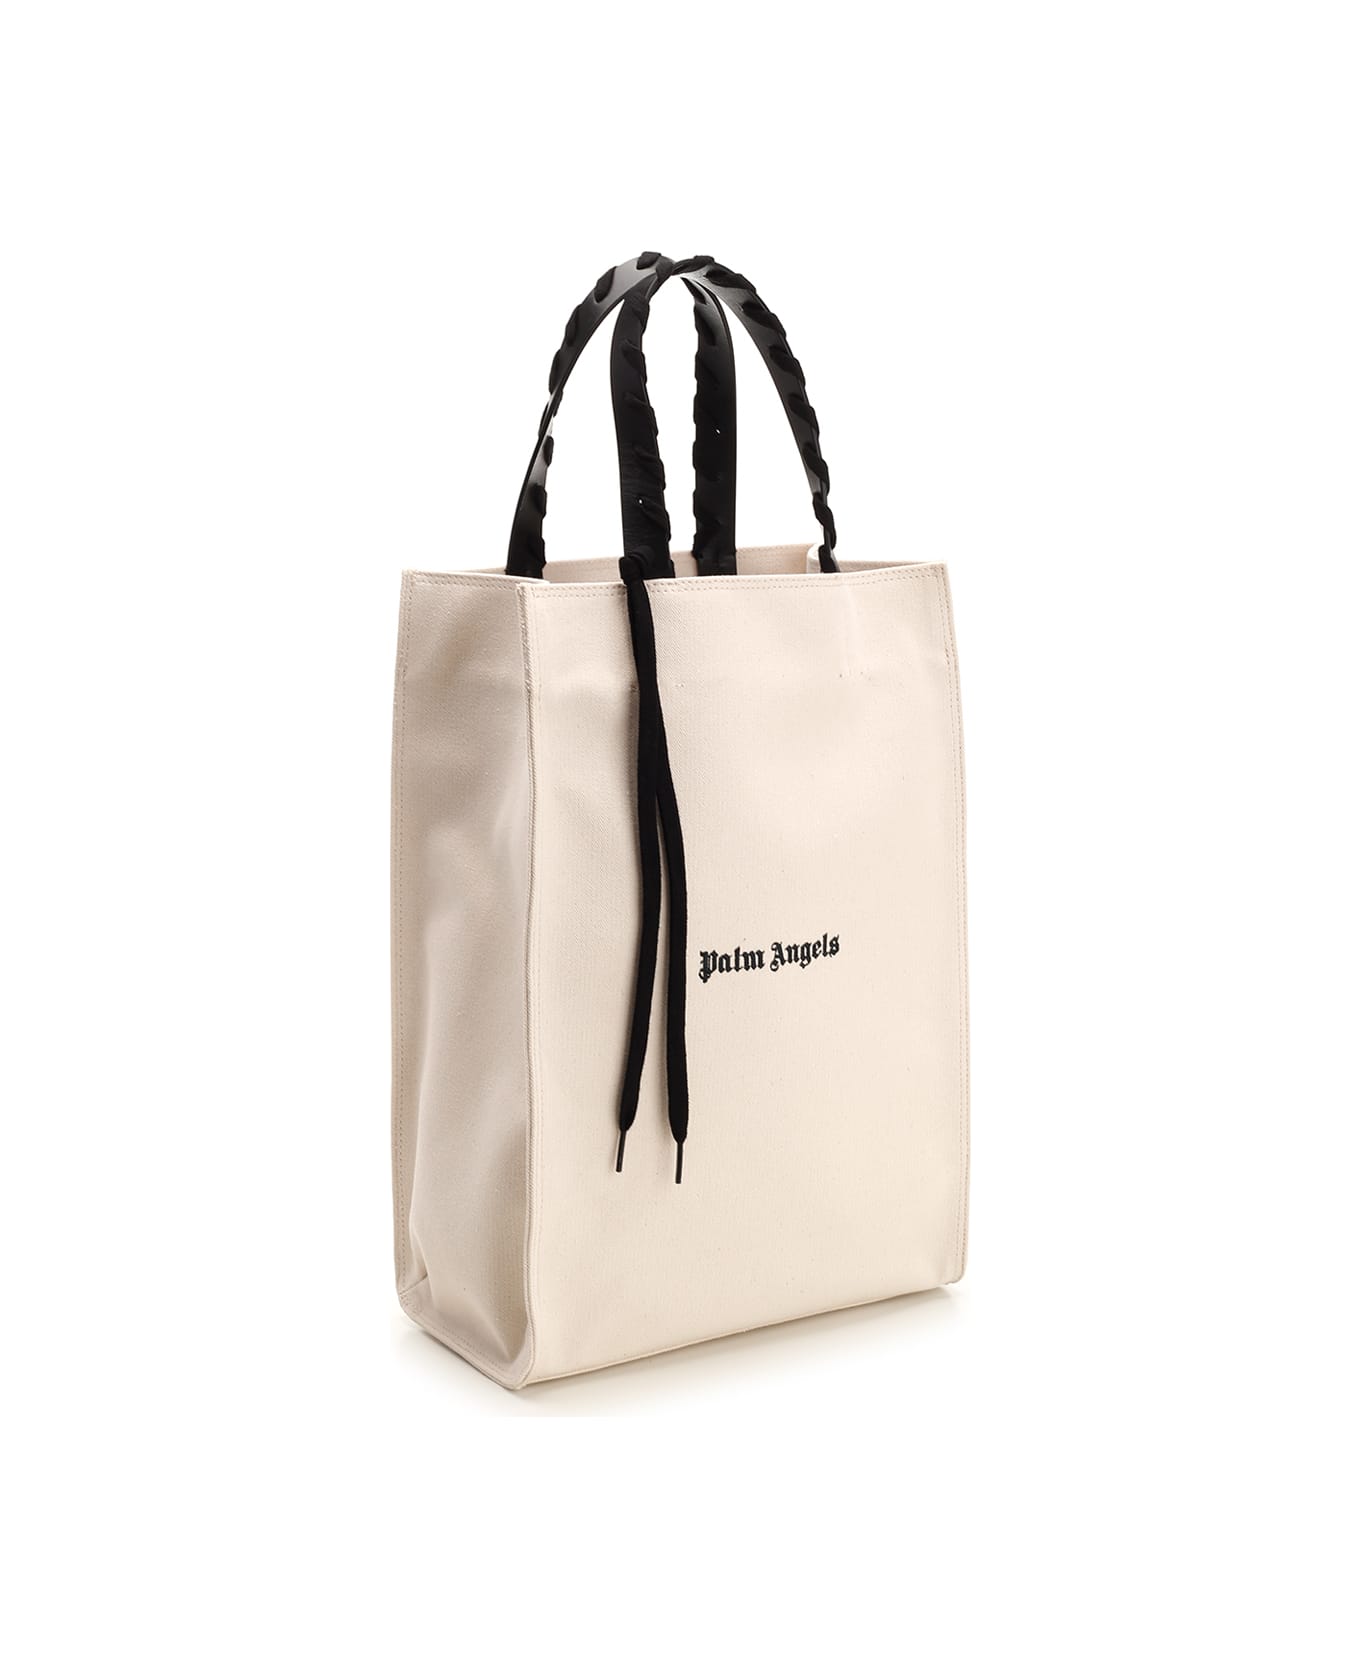 Palm Angels Ivory Cotton Tote Bag - NATURALBL